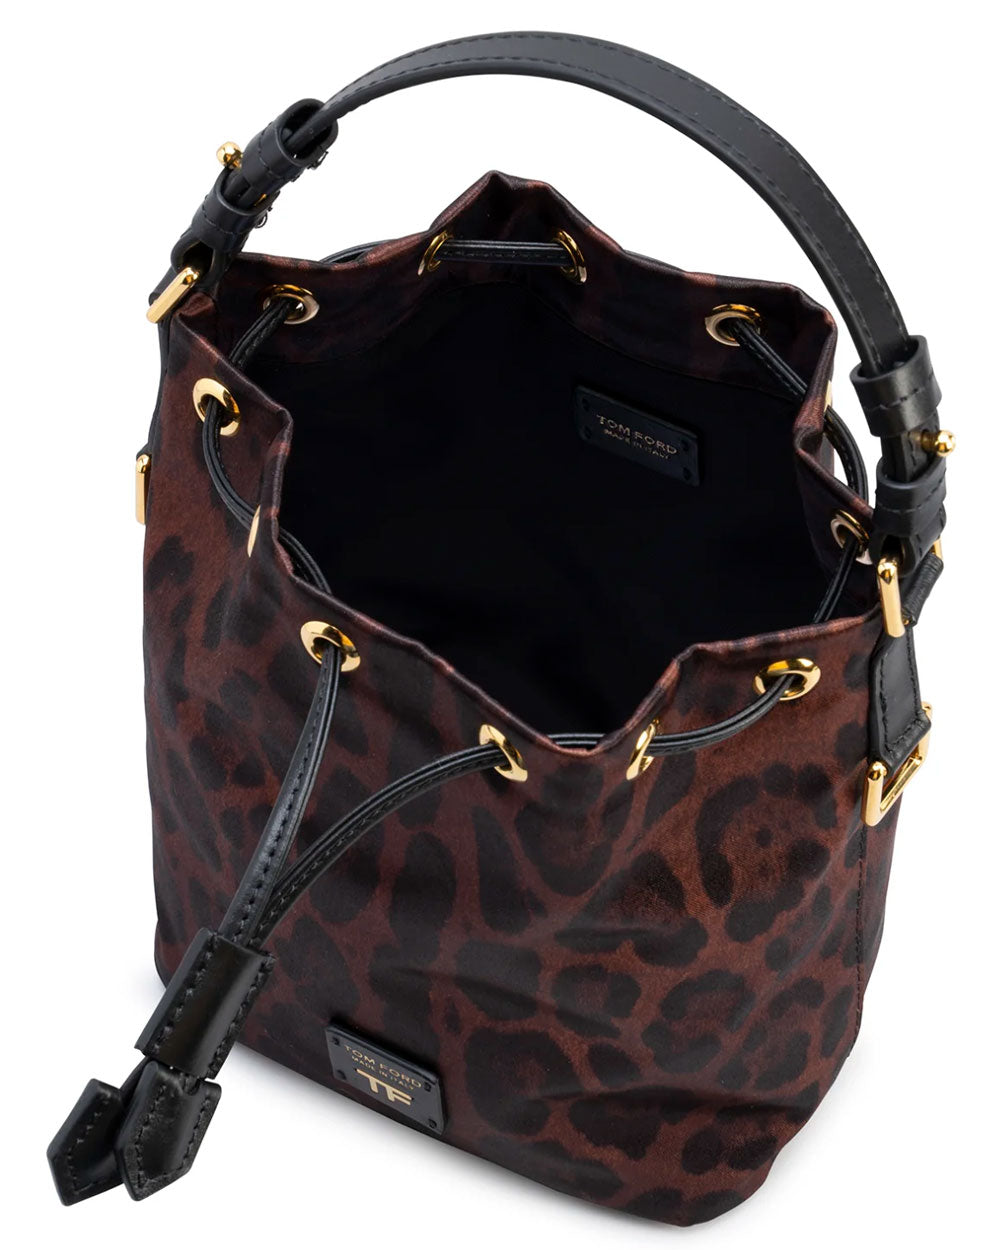 Nylon Animalier Small Bucket Bag in Black and Brown